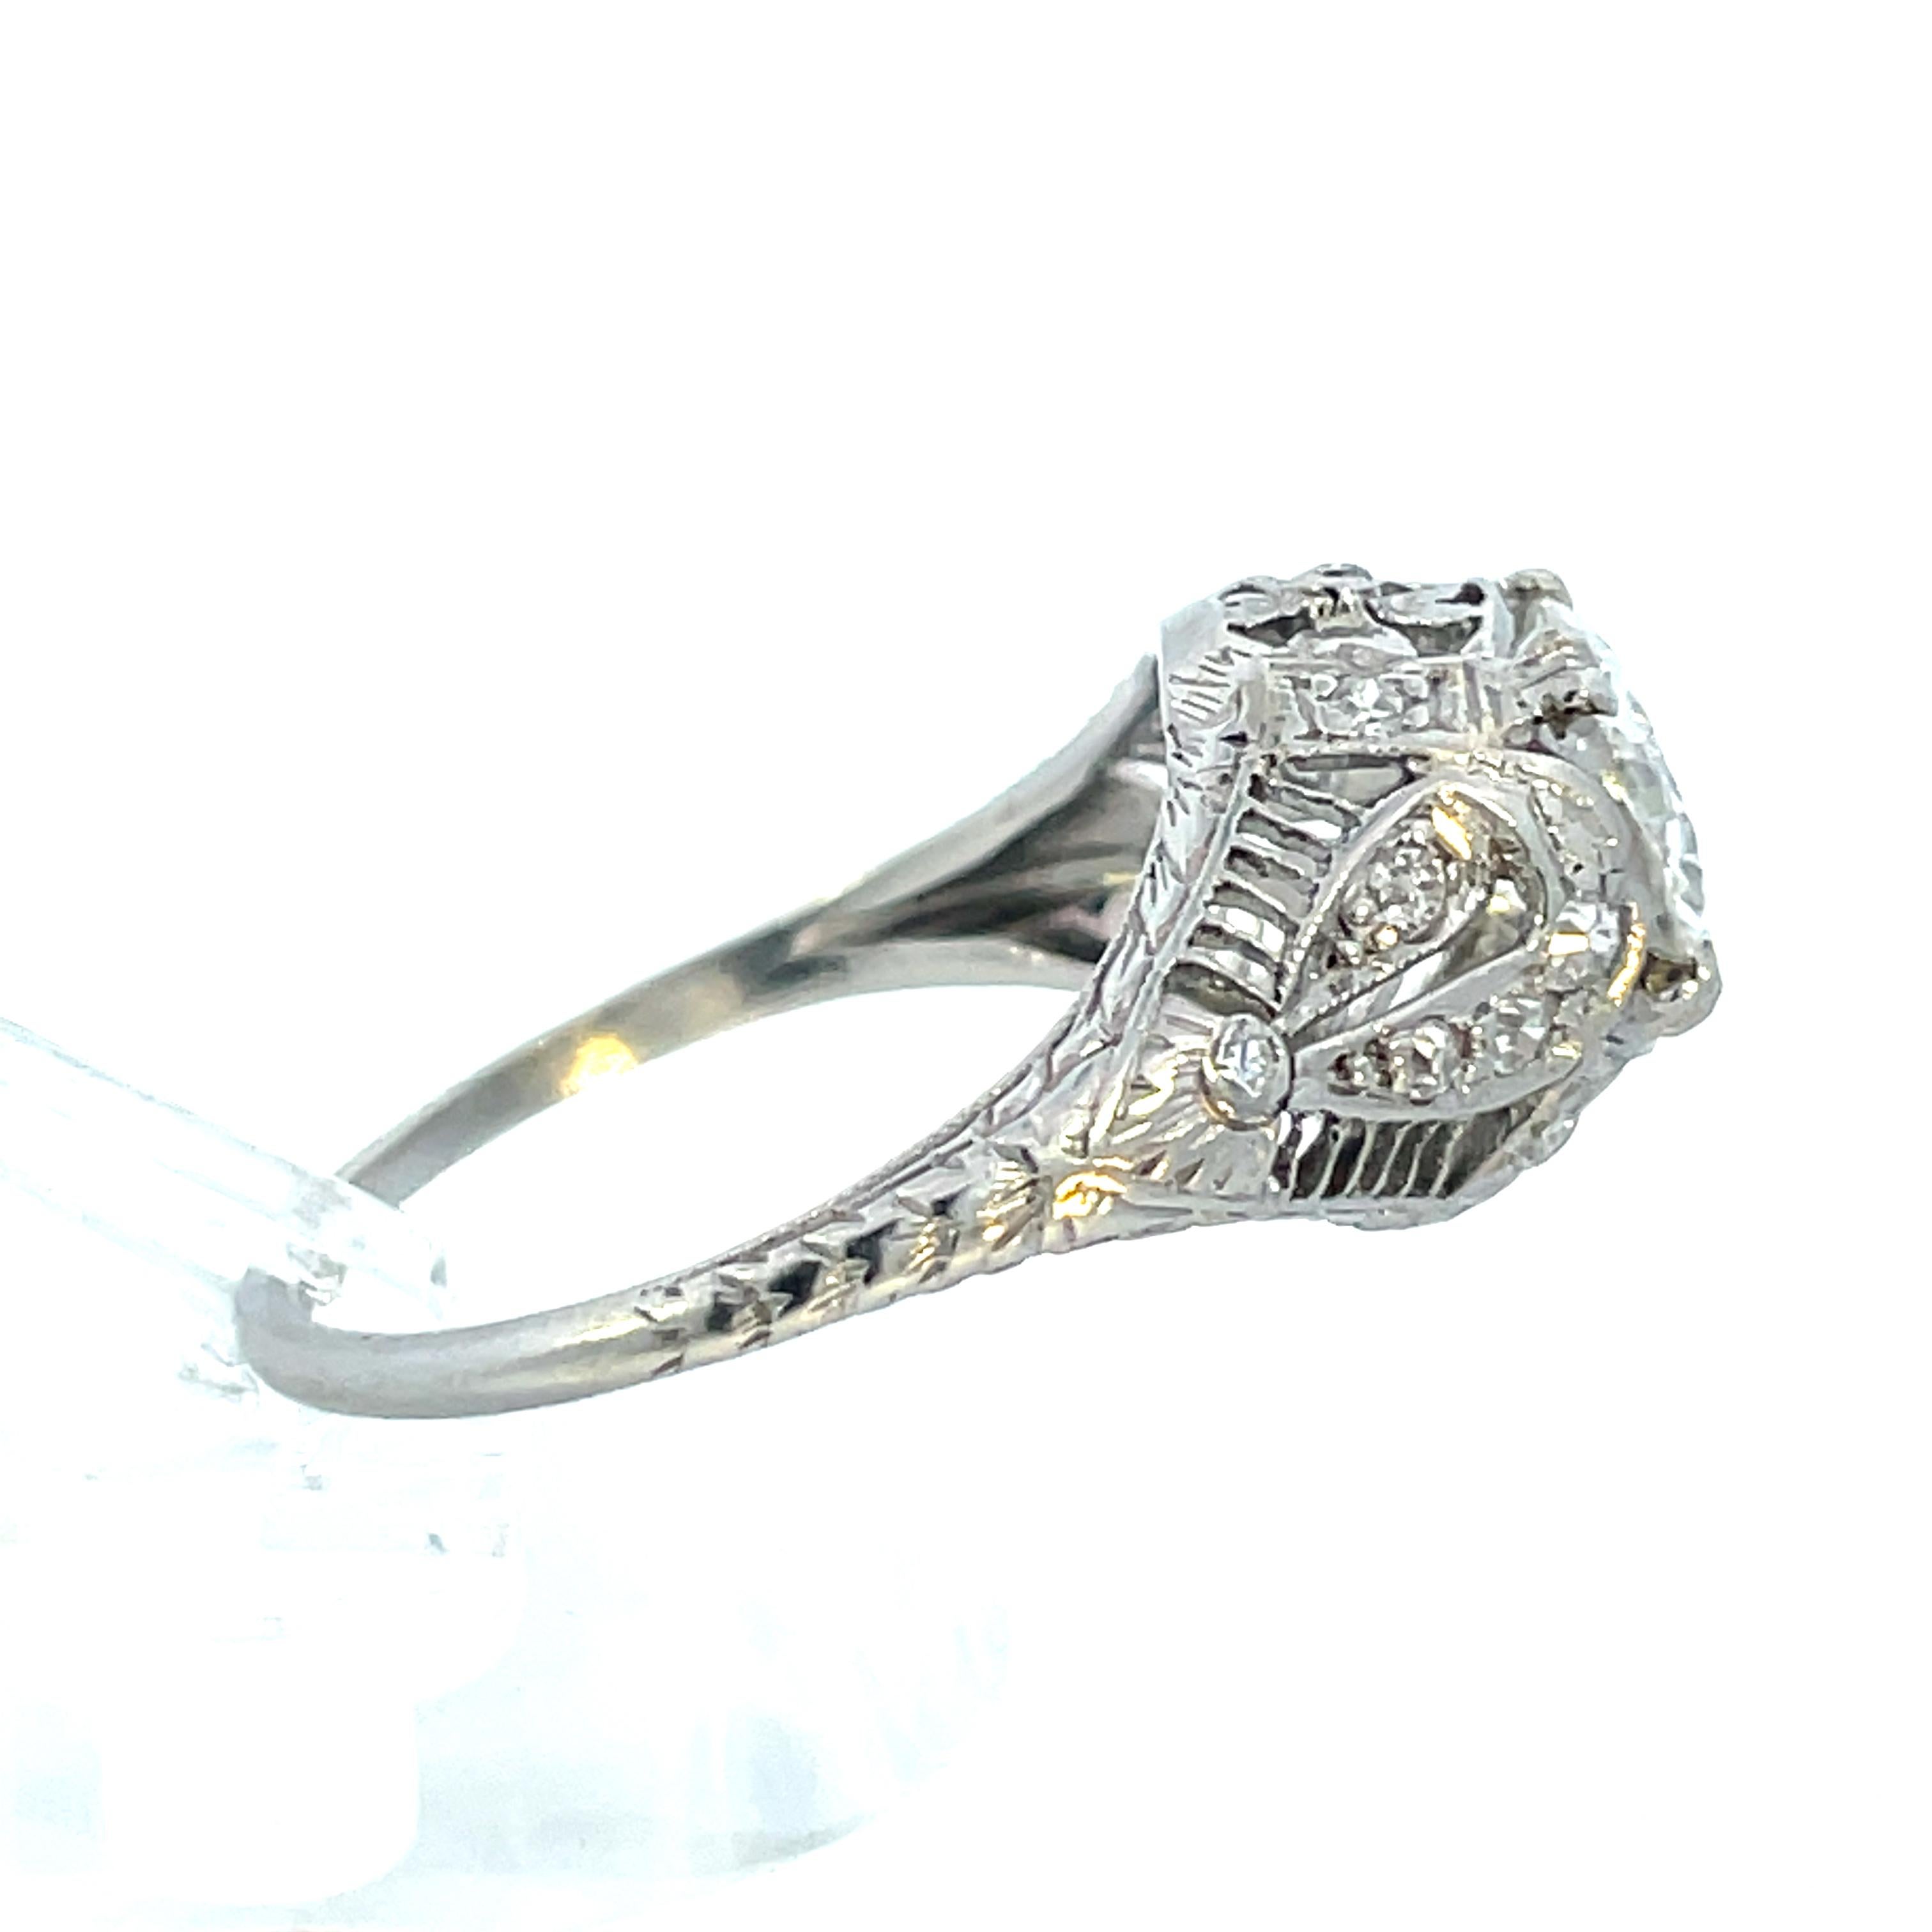 1910 Edwardian Platinum Filigree Ring with Round and European Cut Diamonds  In Excellent Condition For Sale In Lexington, KY